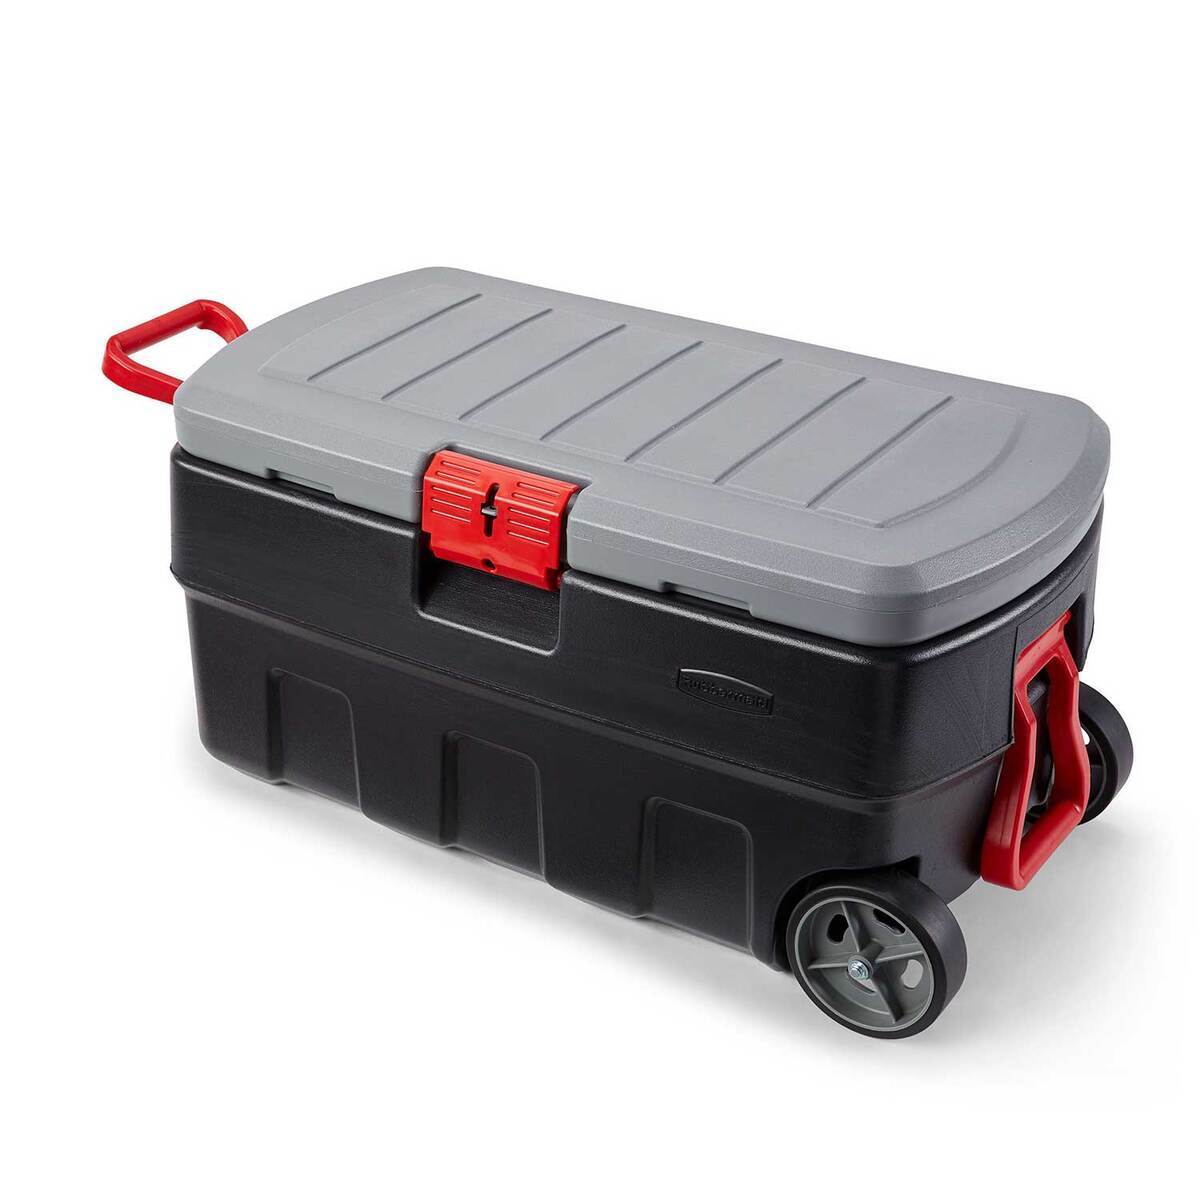 Rubbermaid Action Packer - 24 Gallon